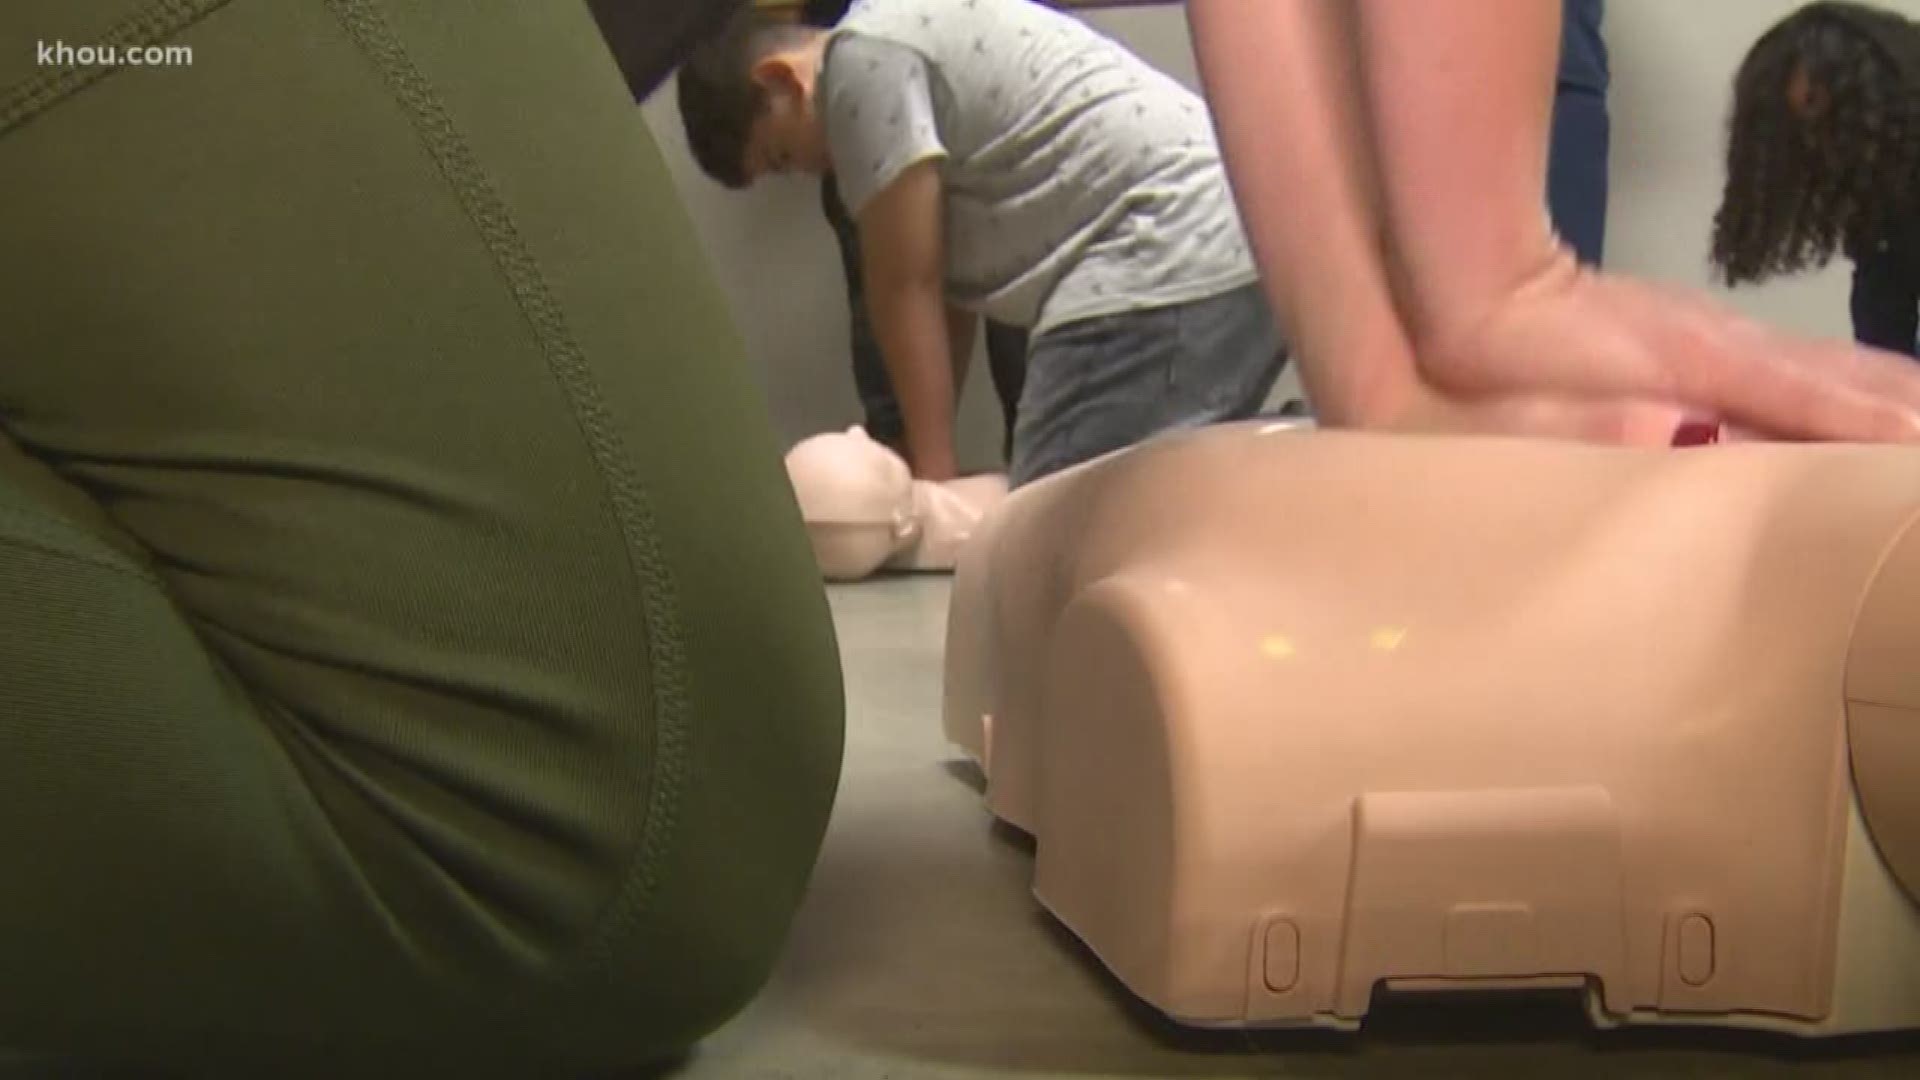 The north Houston lightning strike survivor saved by CPR is learning the life-saving skill that saved his life.